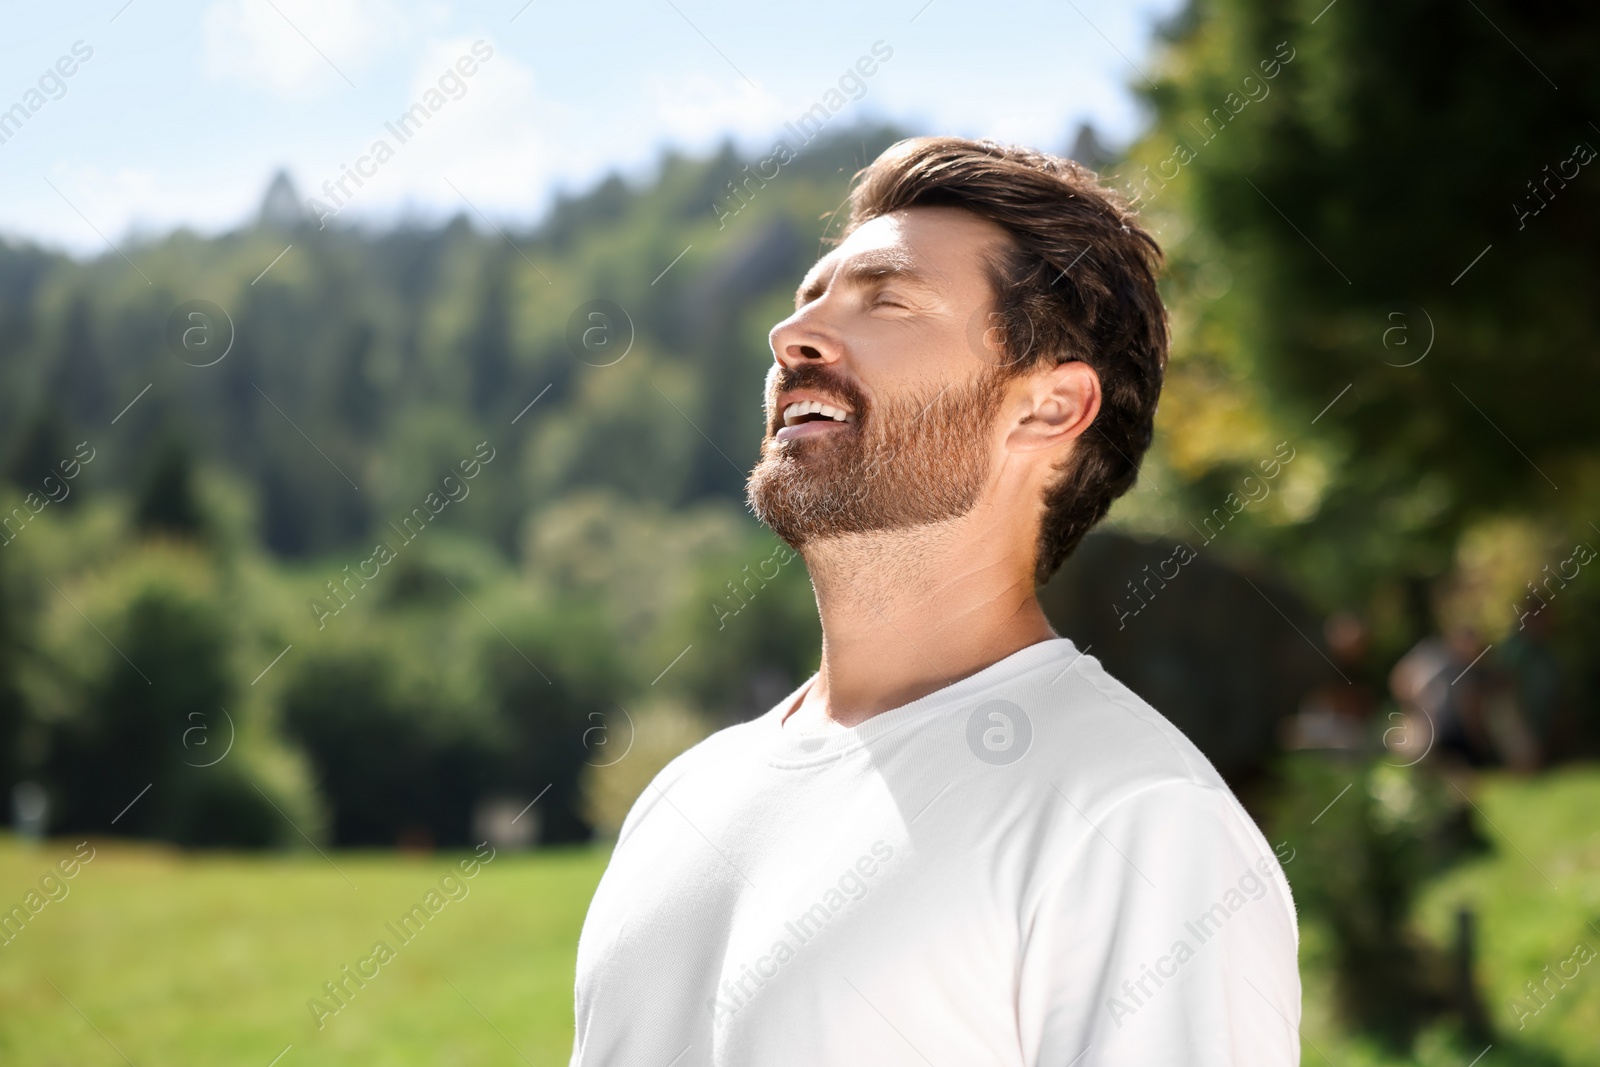 Photo of Feeling freedom. Man enjoying nature outdoors on sunny day, space for text